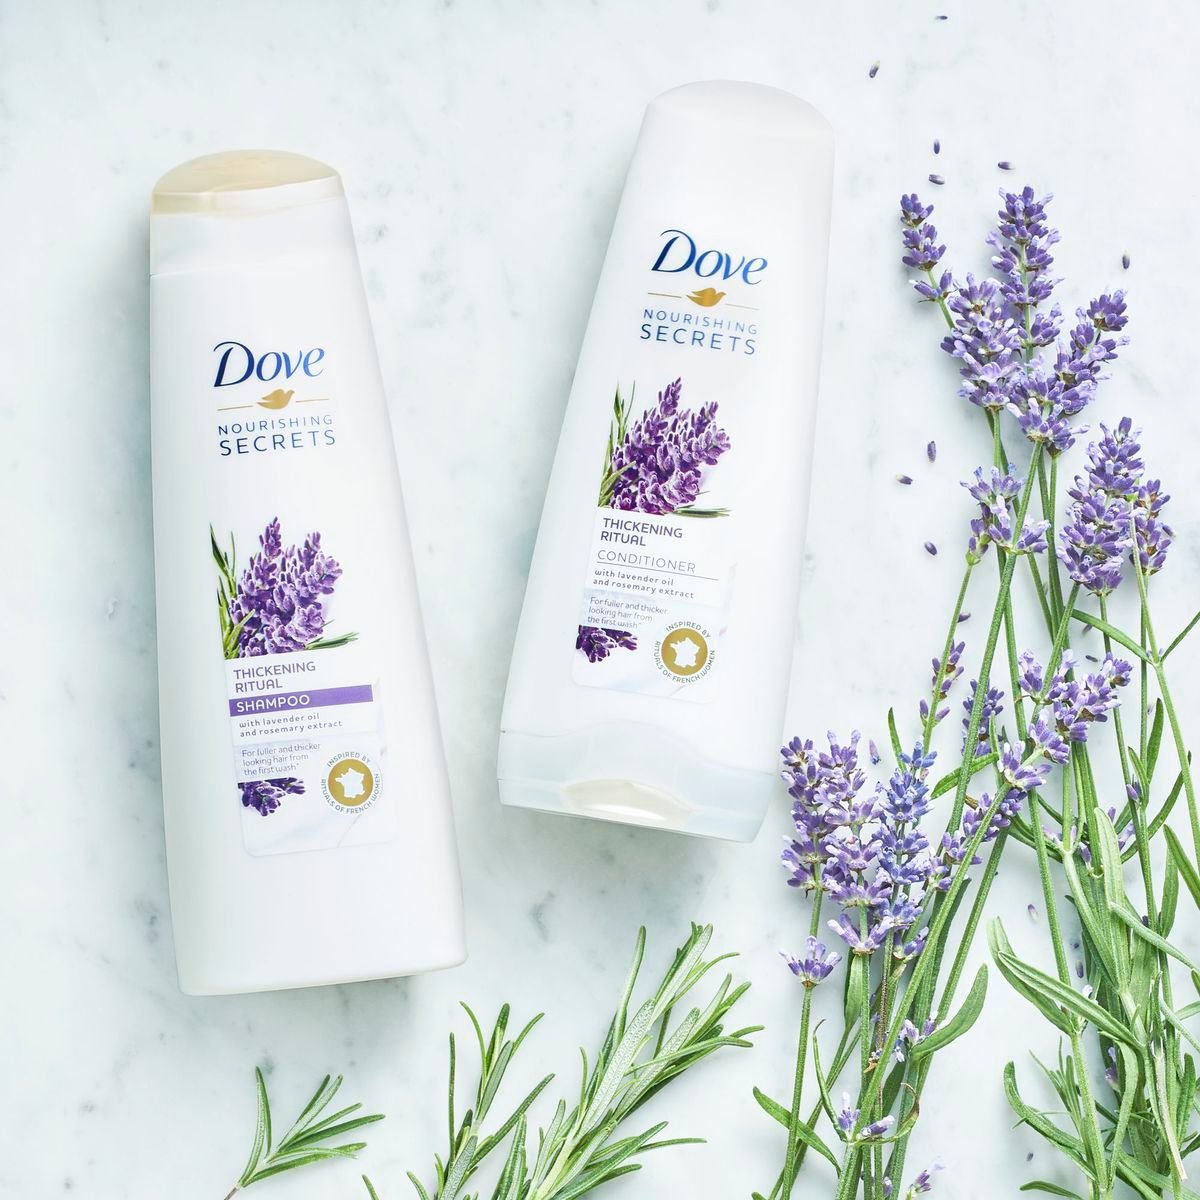 Dove Conditioner Relaxing Ritual Lavender Oil and Rosemary Extract, 350 ml